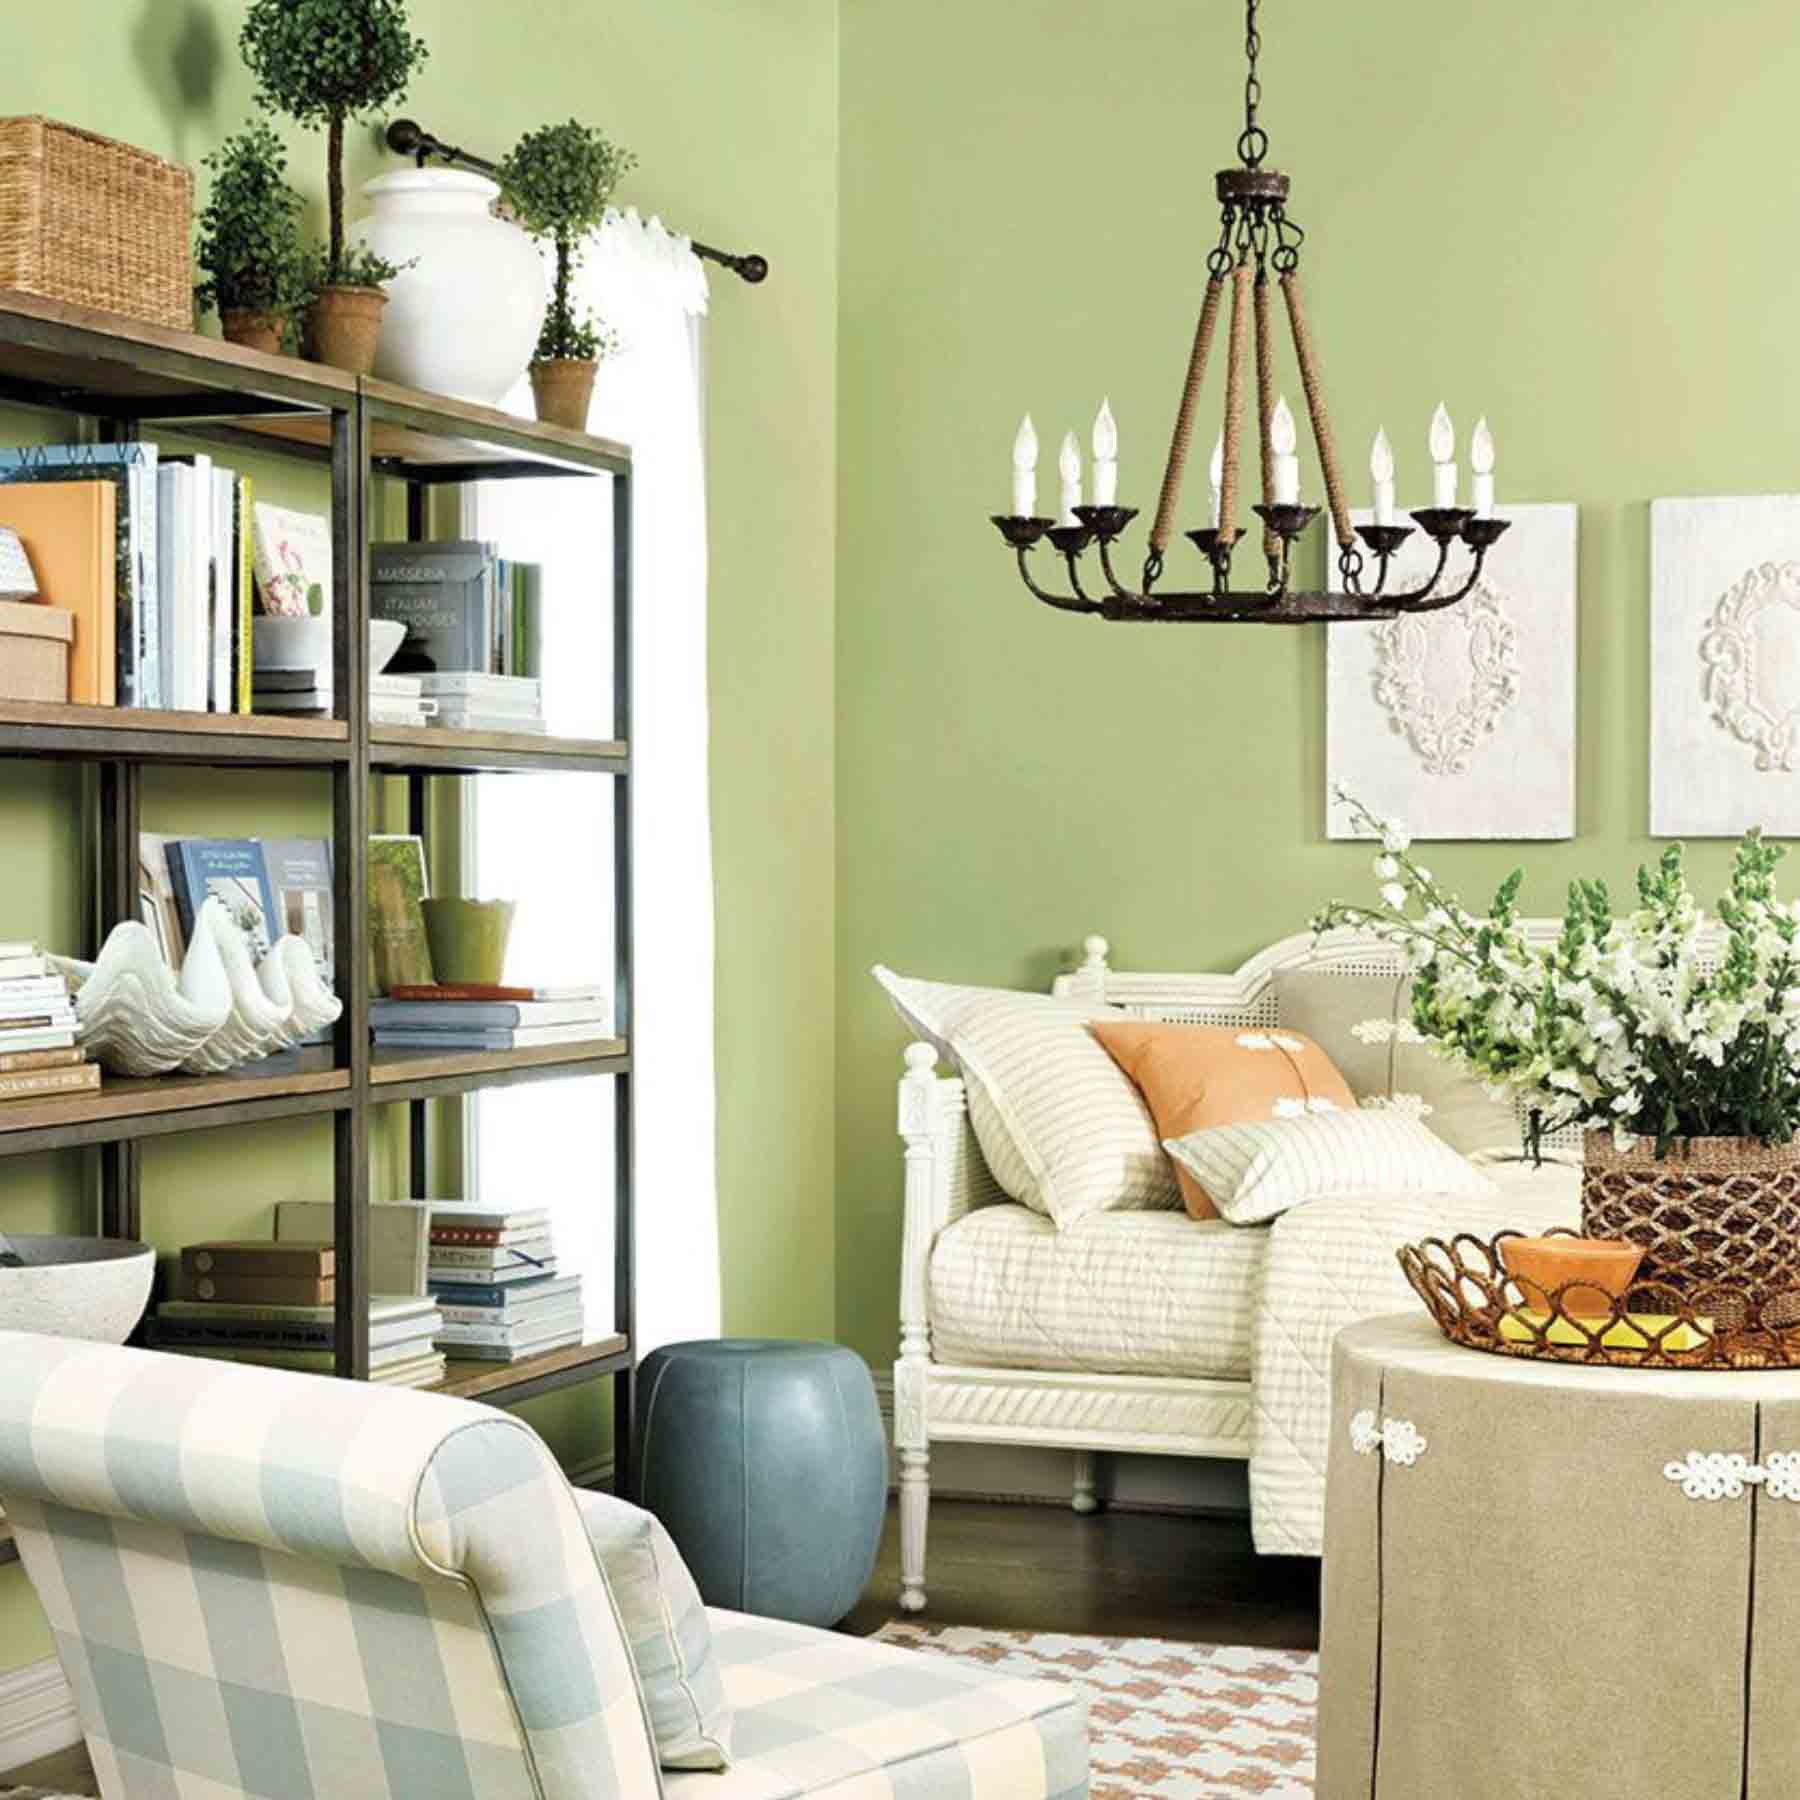 opting to change the wall color of your home is a simple yet effective way to refresh its appearance